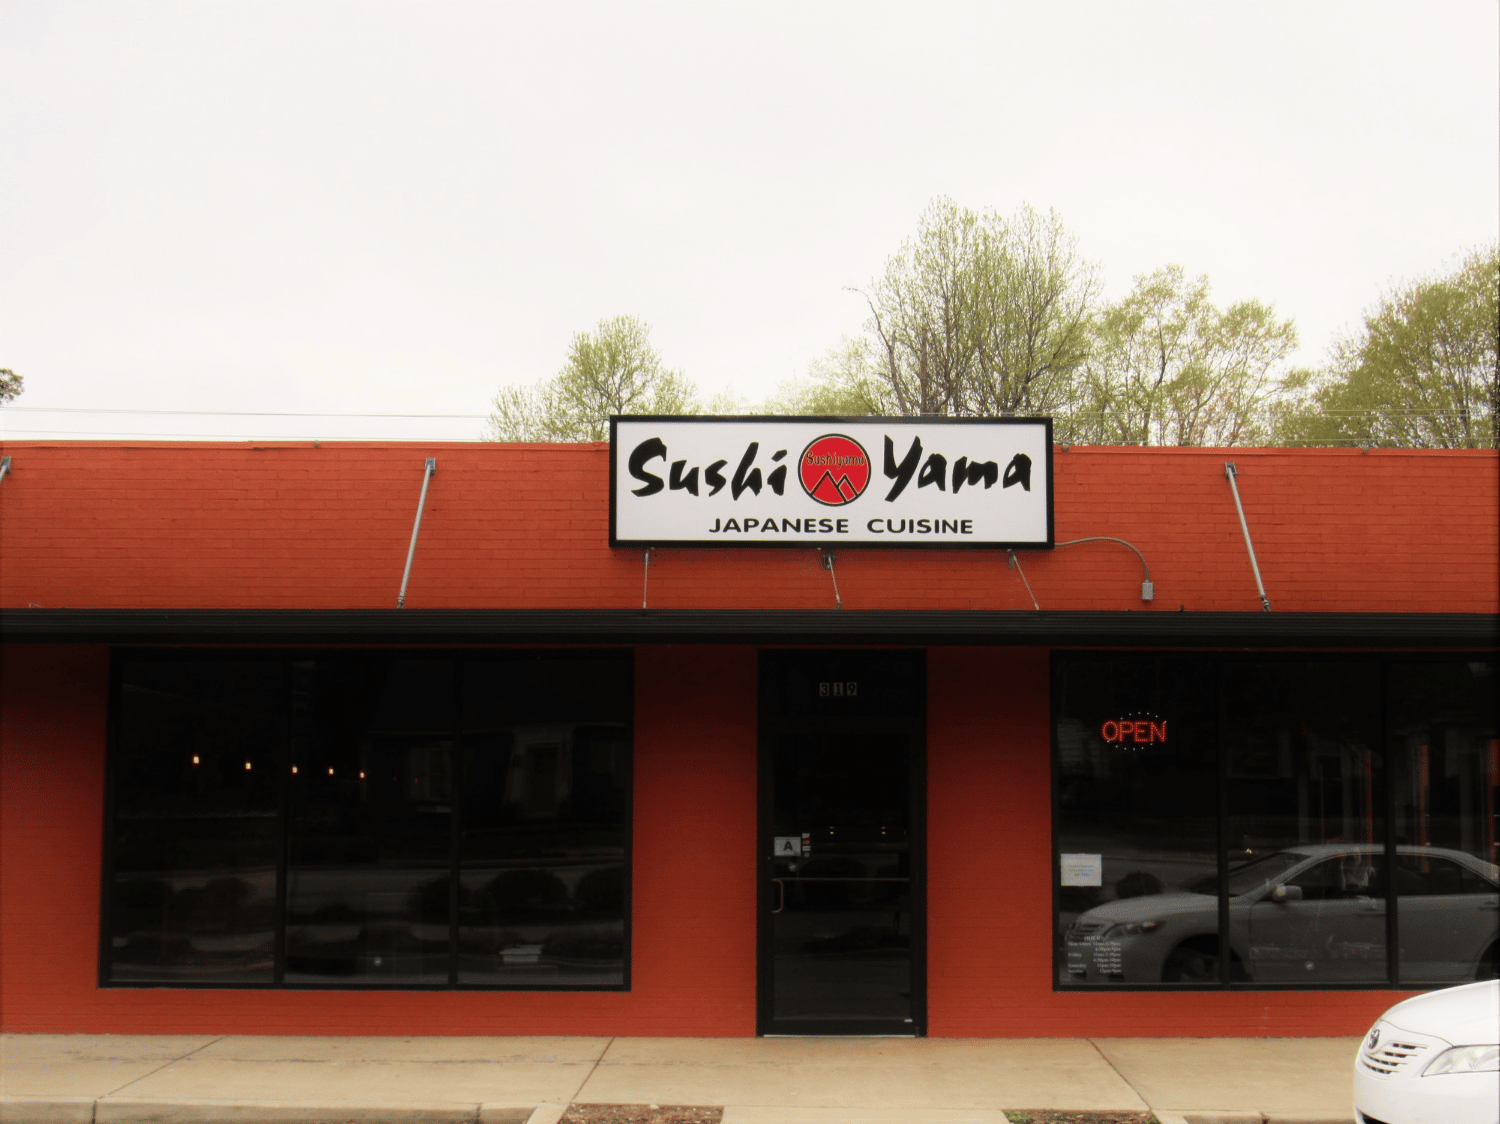 Sushi Yama in downtown Travelers Rest. Image courtesy of Carson Myers.